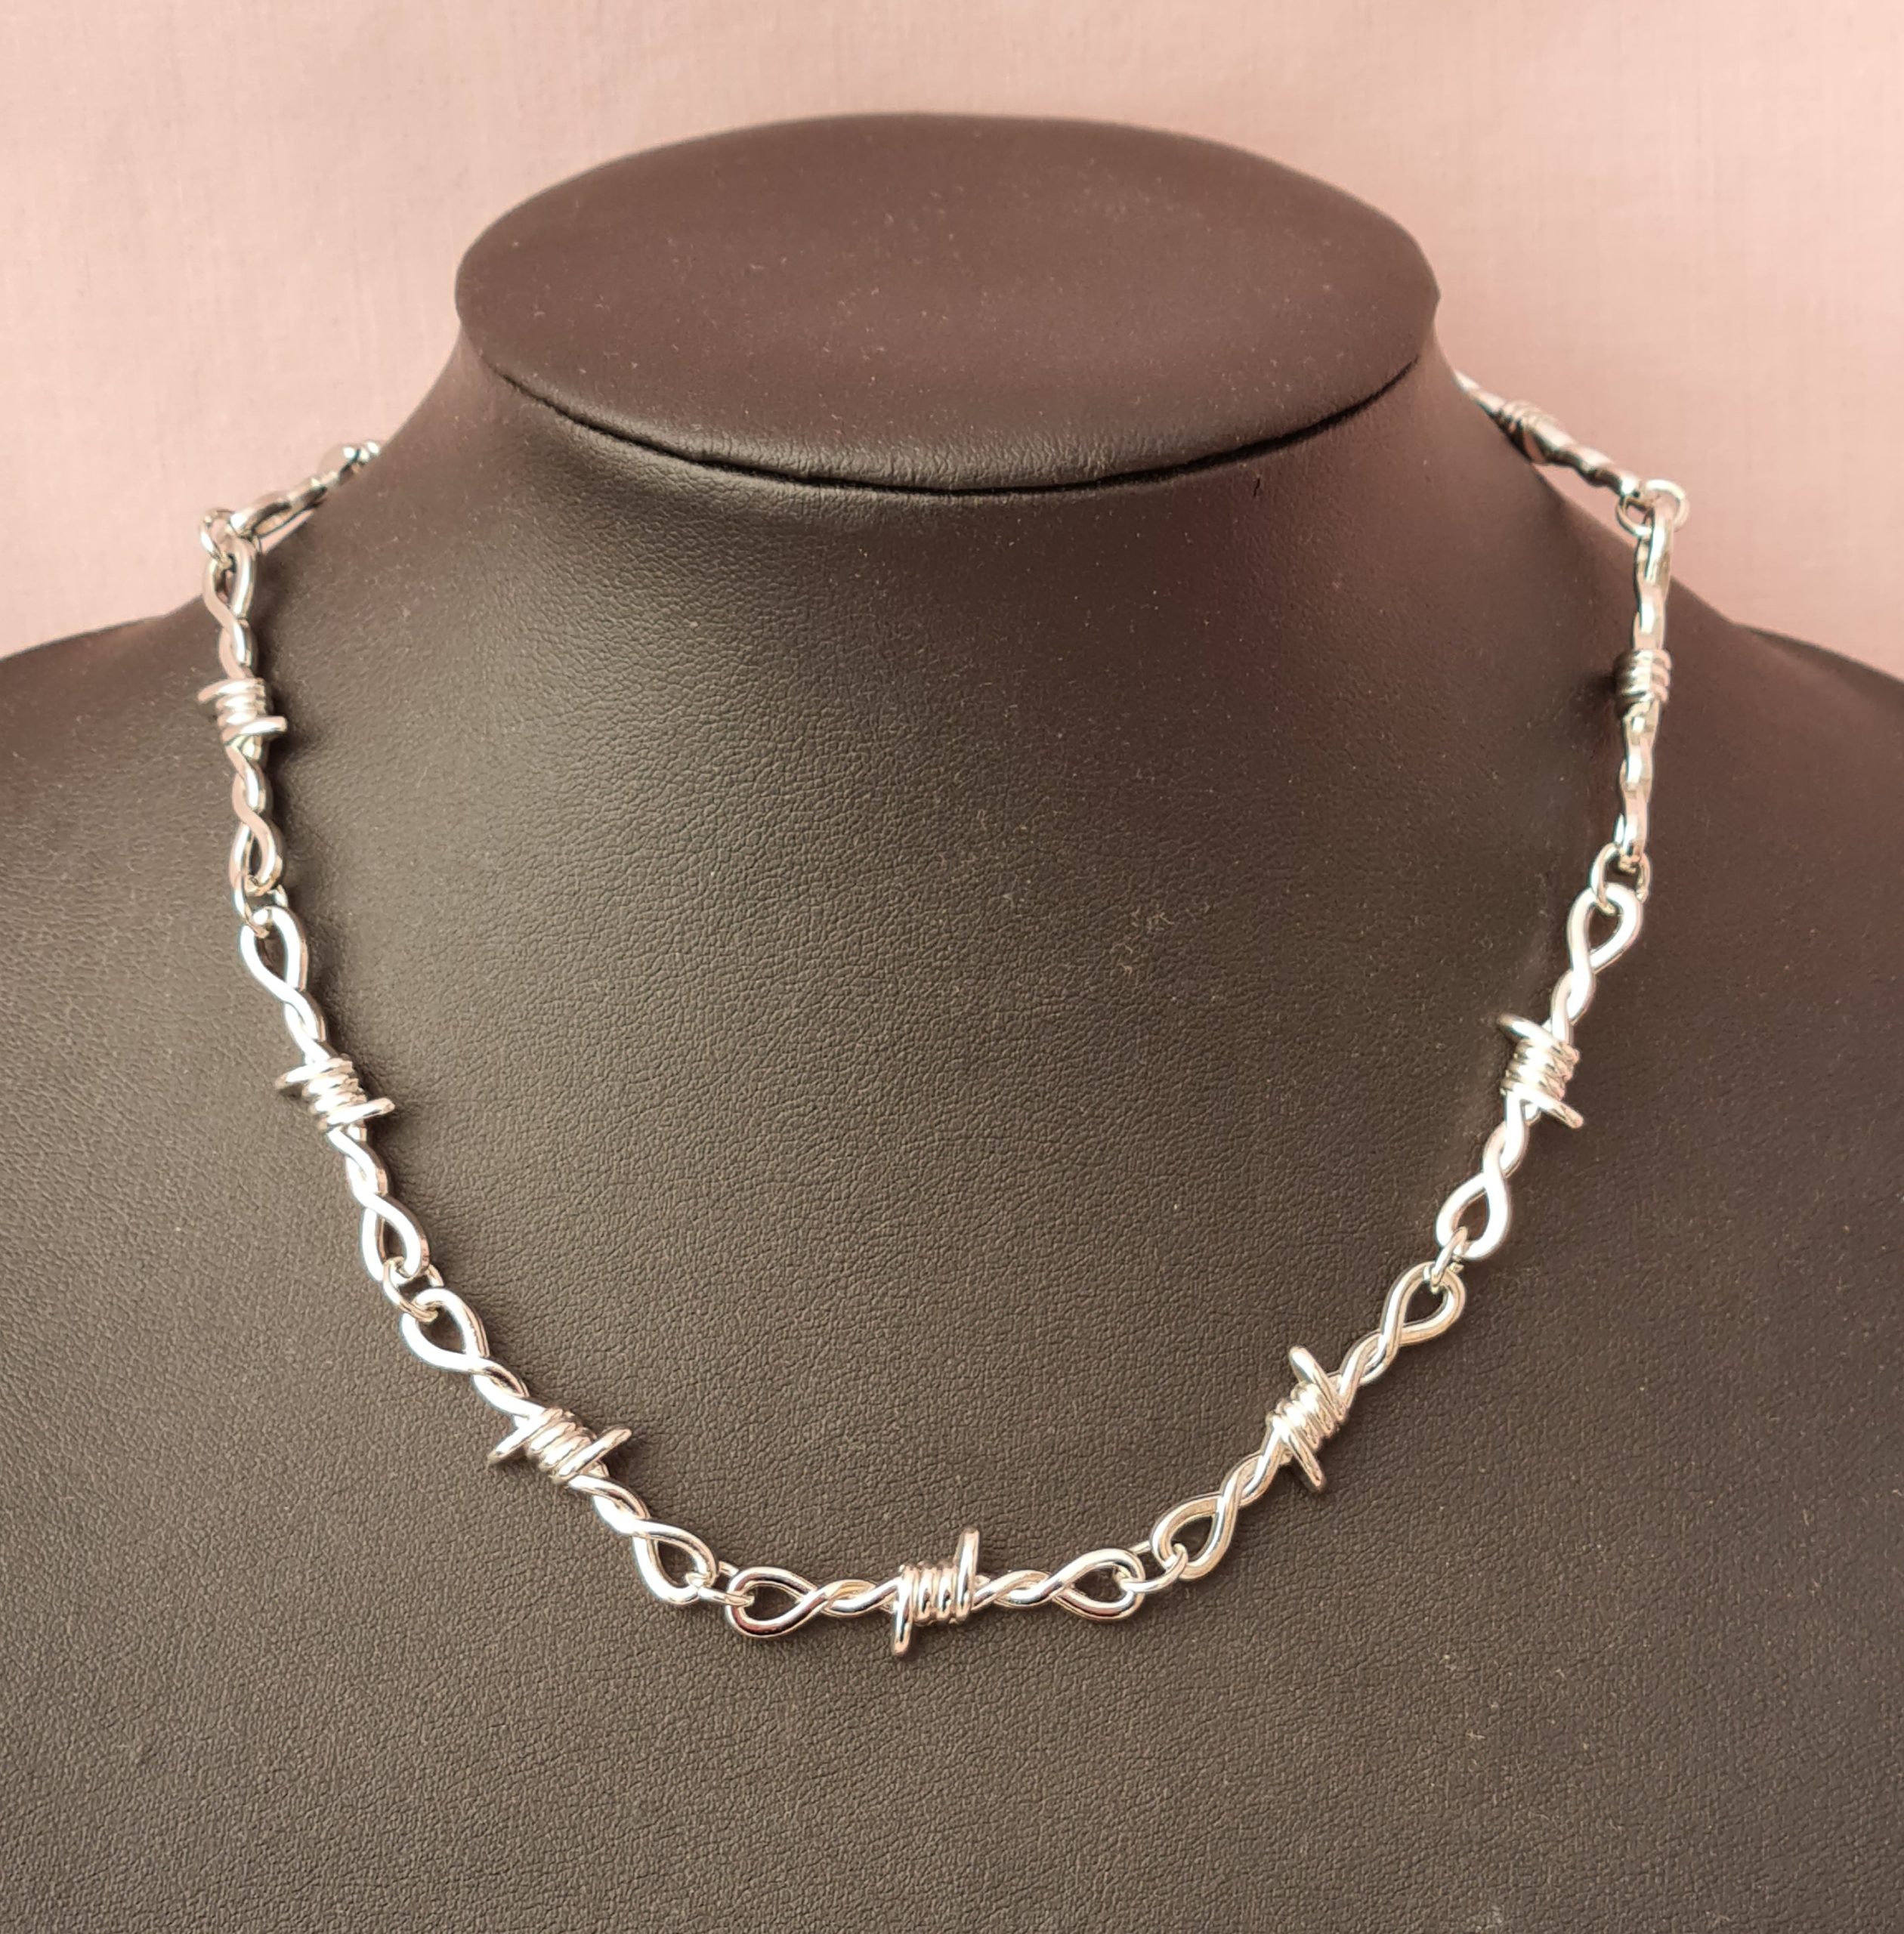 Barbed Wire Choker, Barbed Wire Necklace, Silver Barbed Wire Necklace,  Stainless Steel Barbed Wire Necklace - Etsy